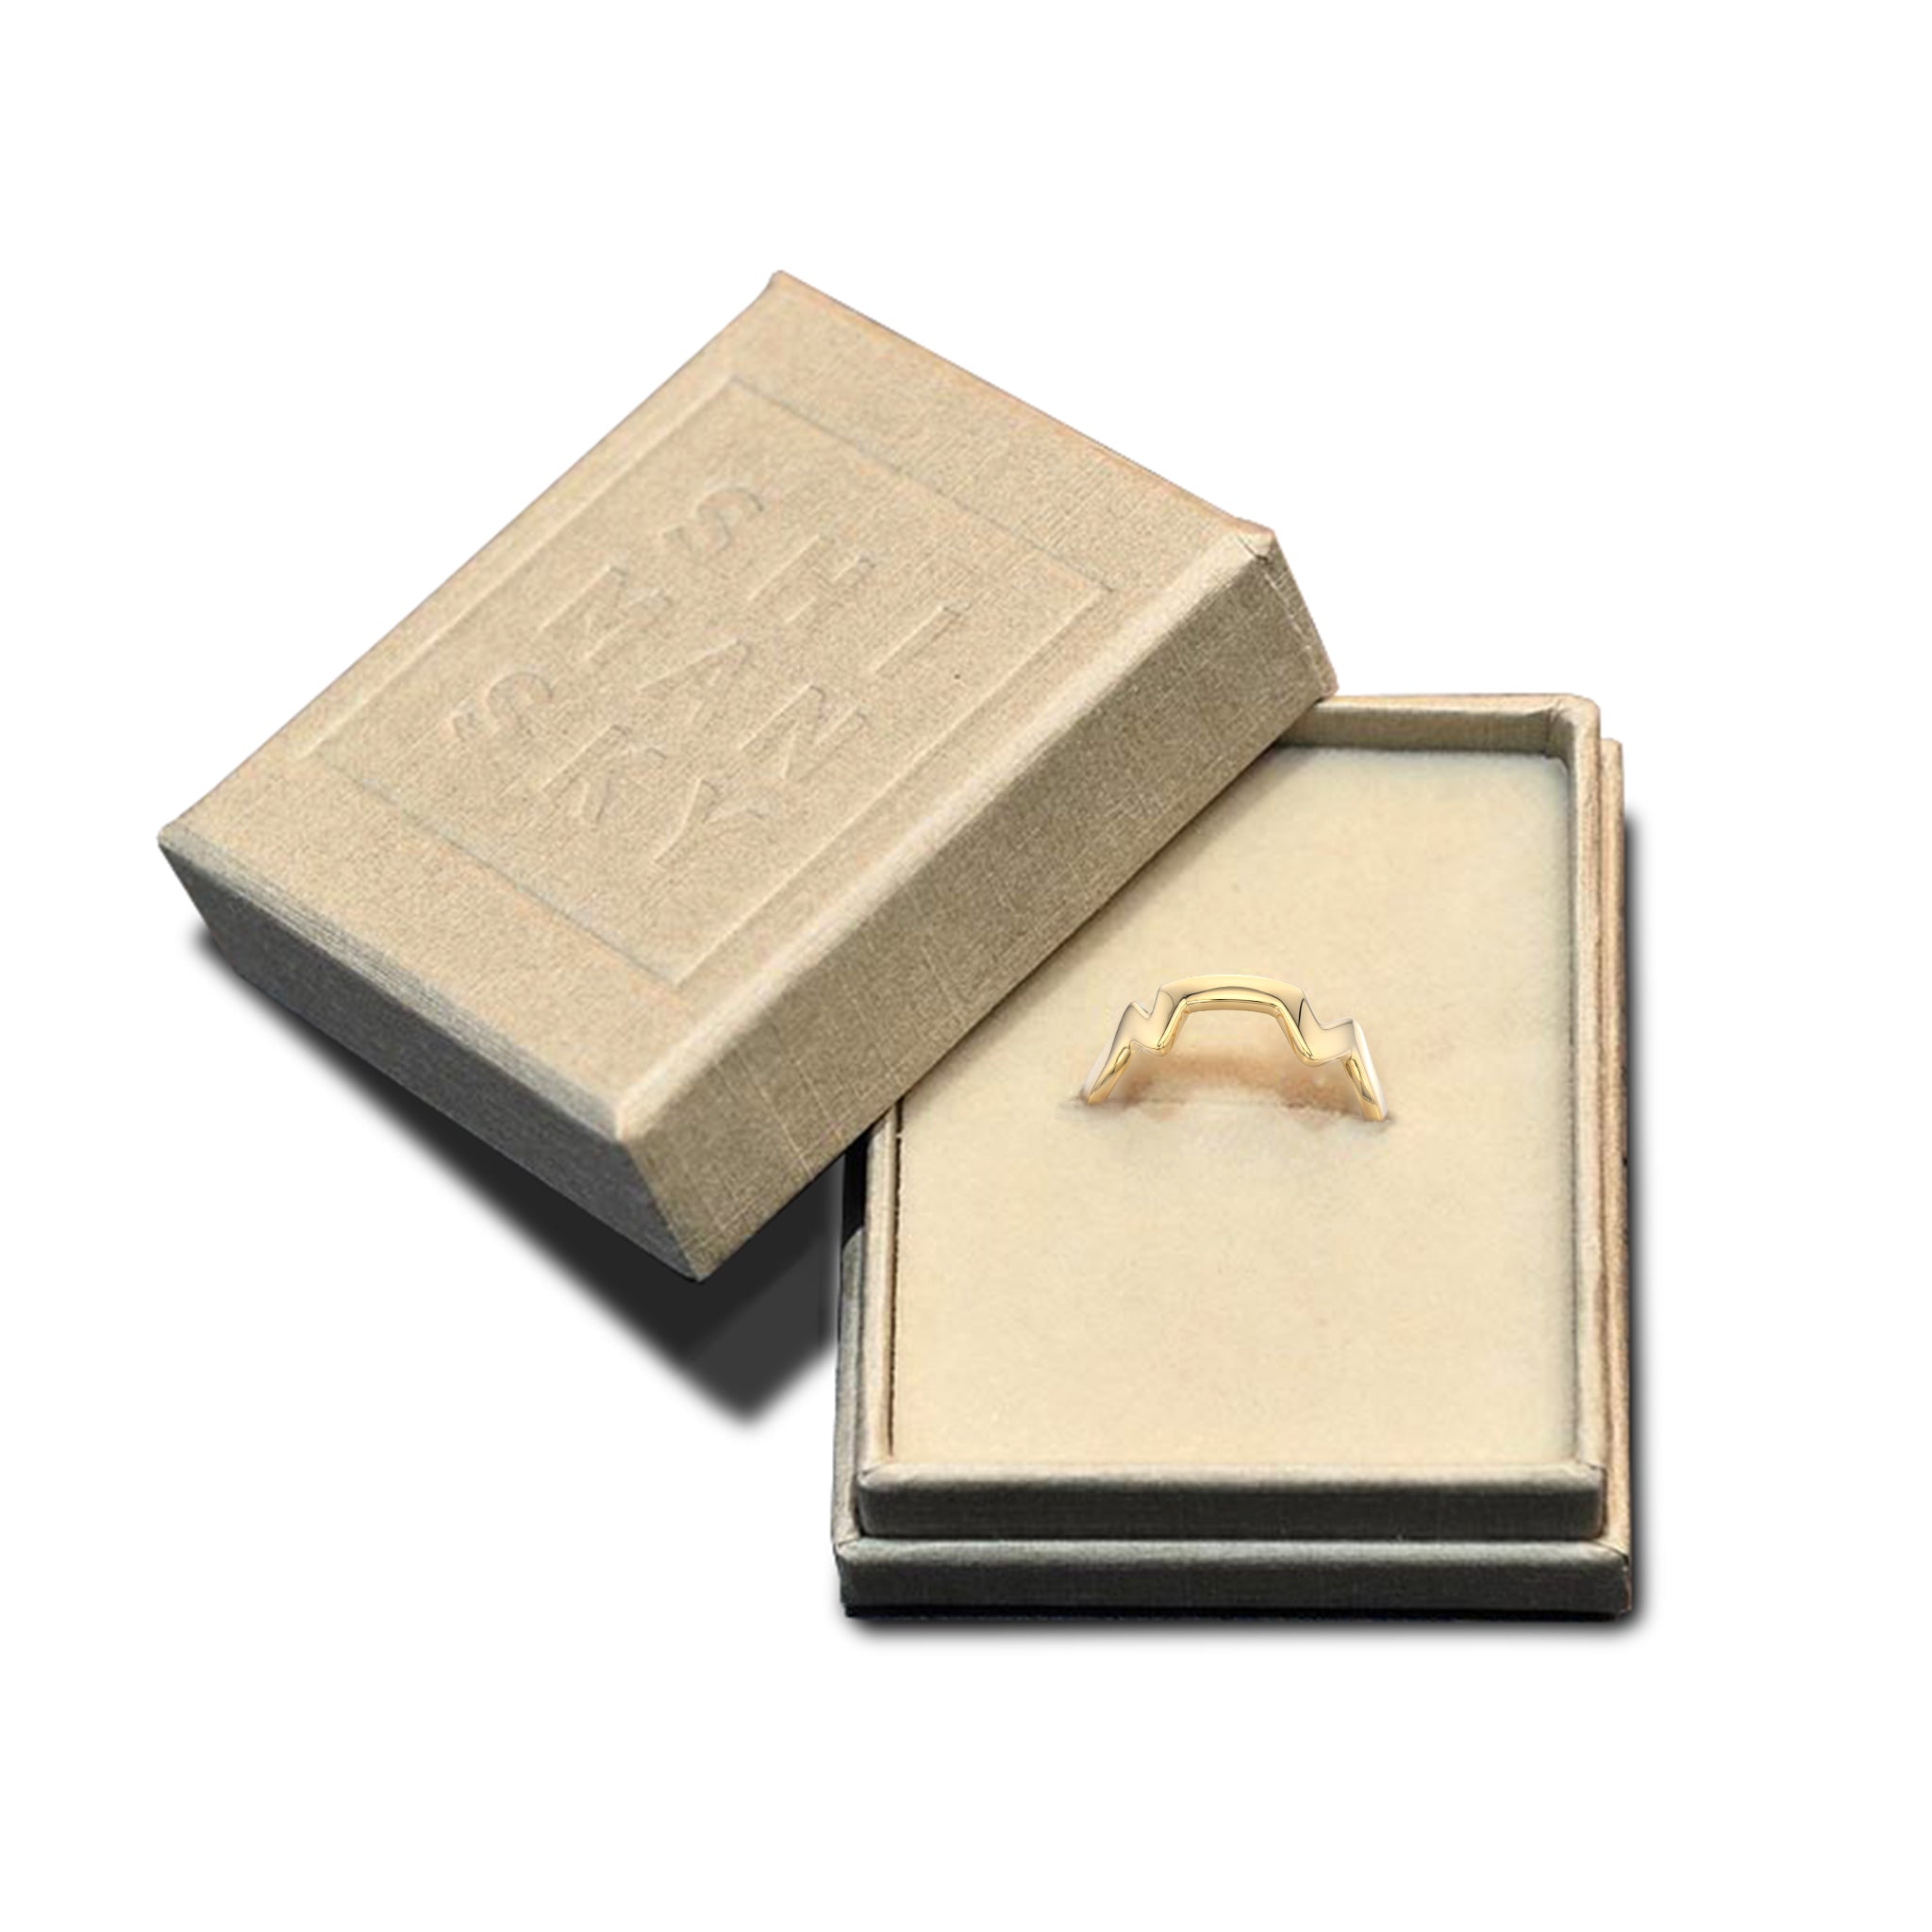 Shimansky - Table Mountain Ring Crafted in 14K Yellow Gold